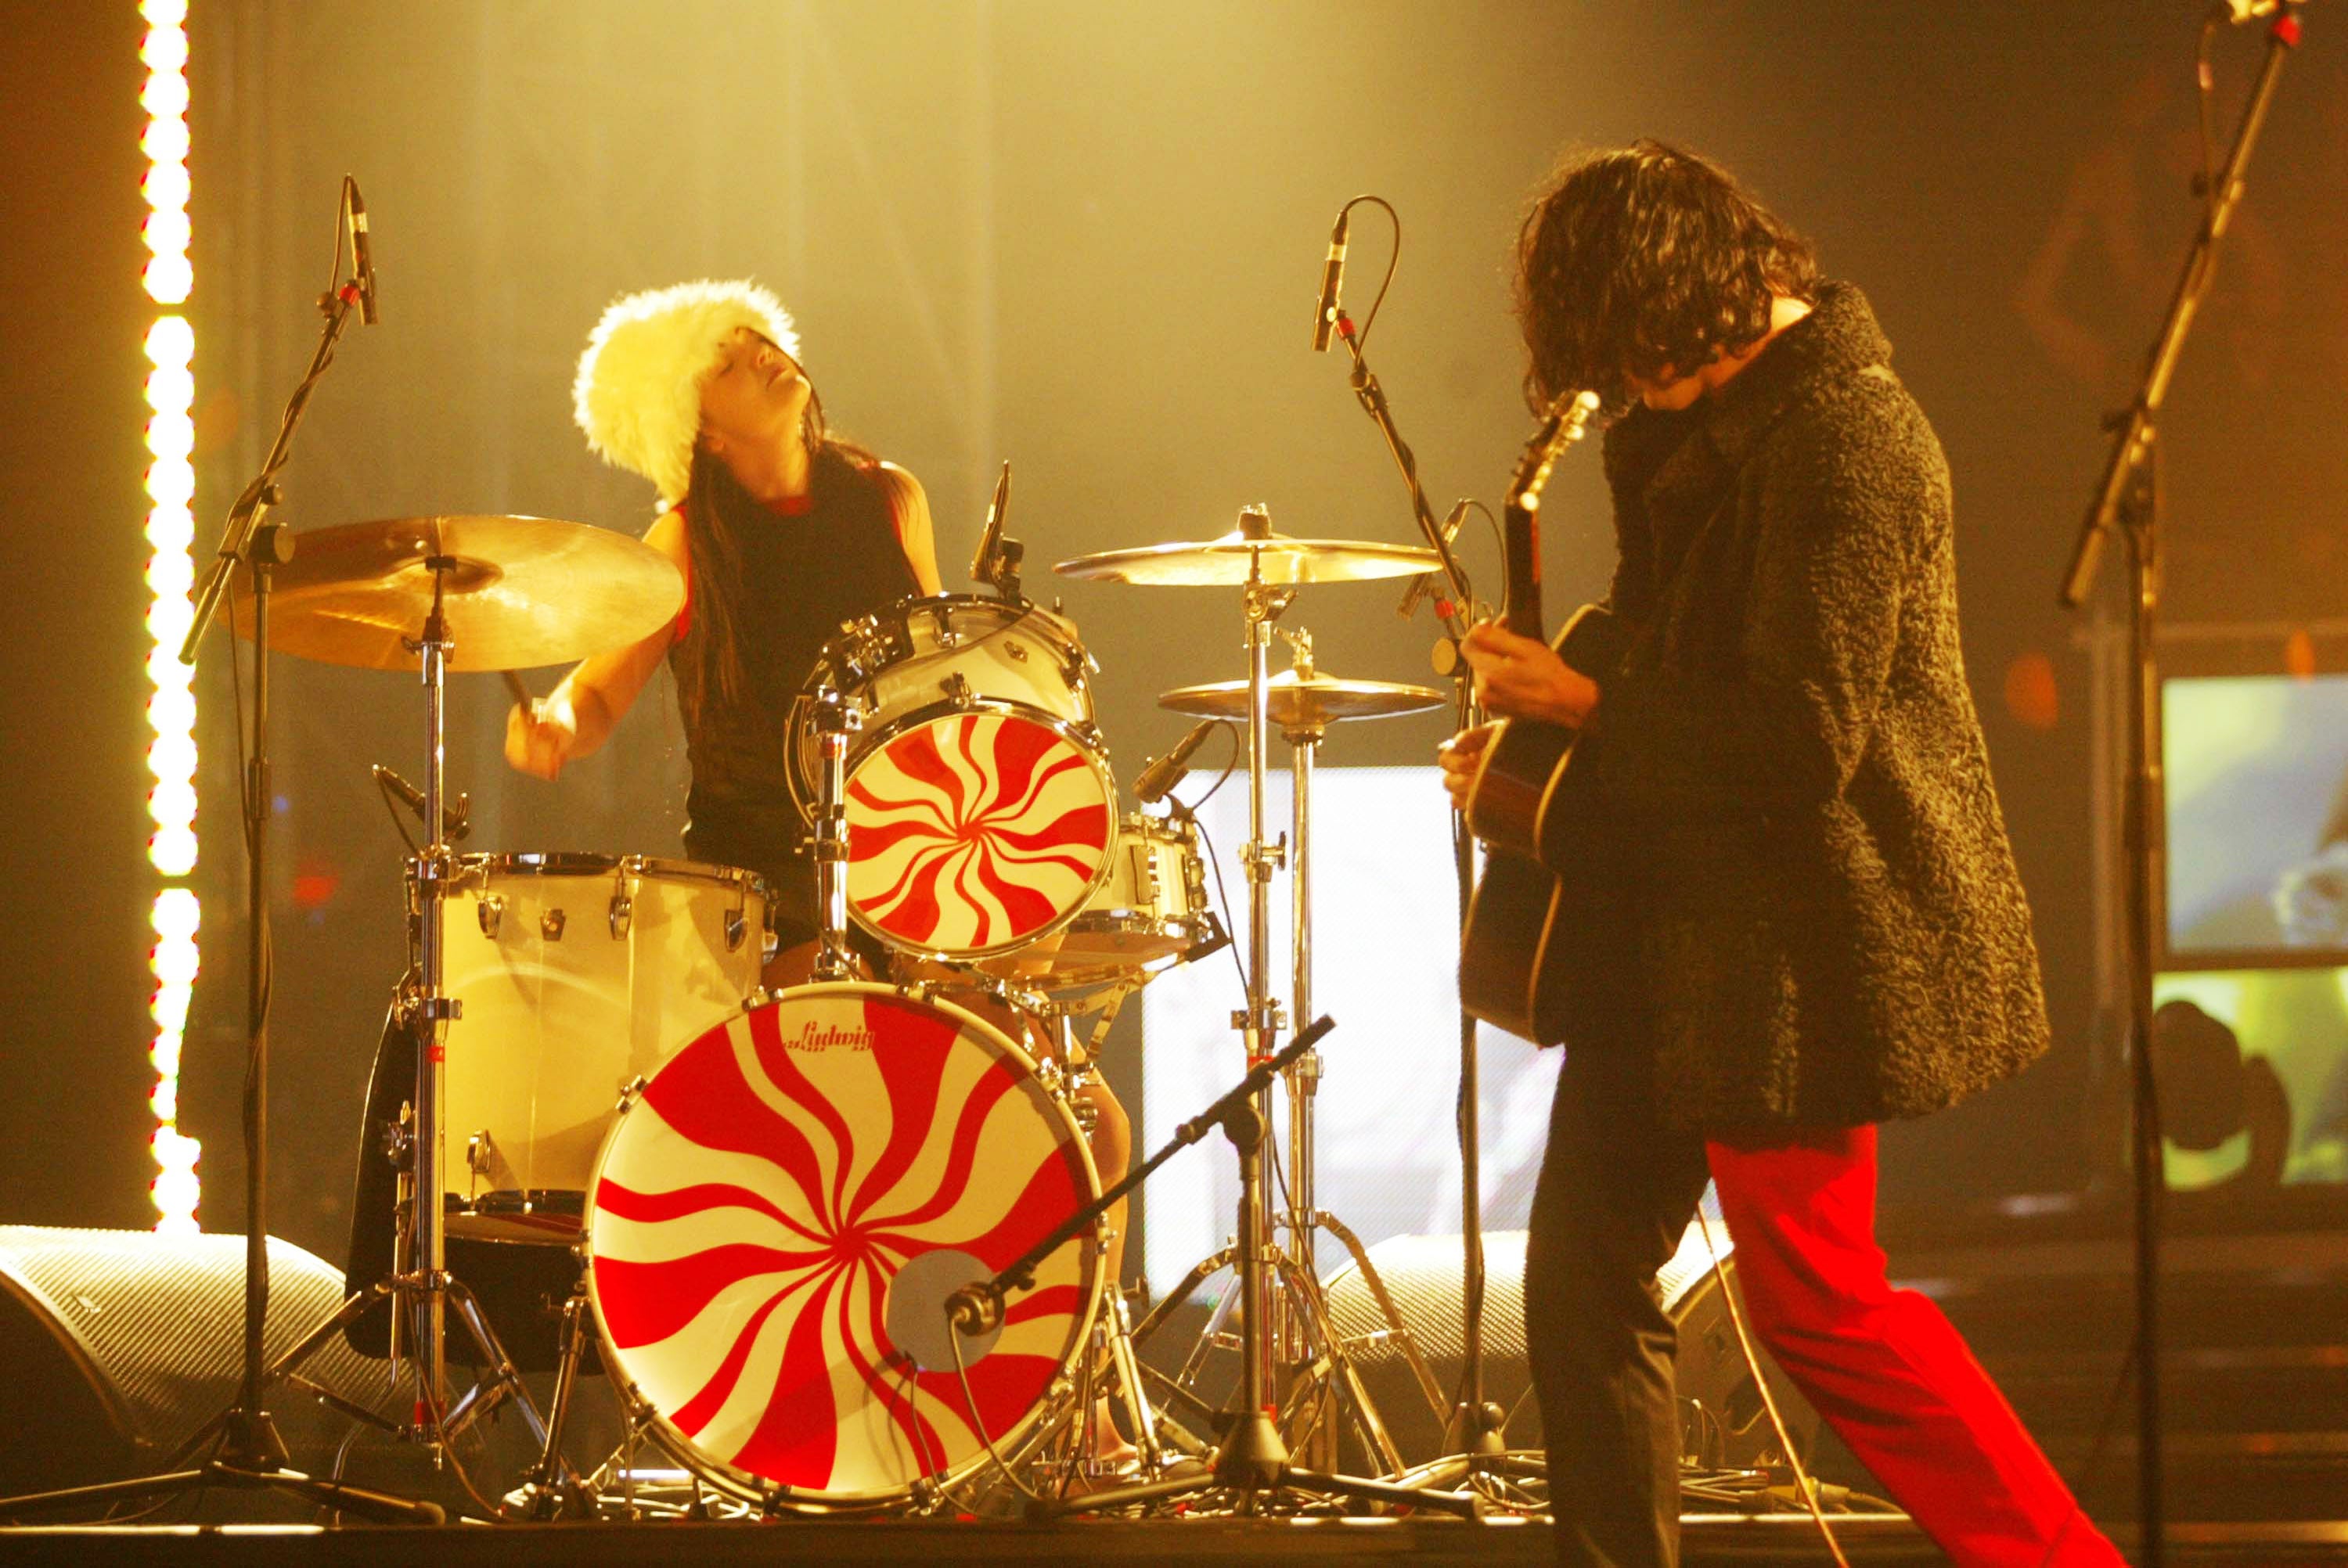 The White Stripes perform at the 2003 MTV Europe Music Awards